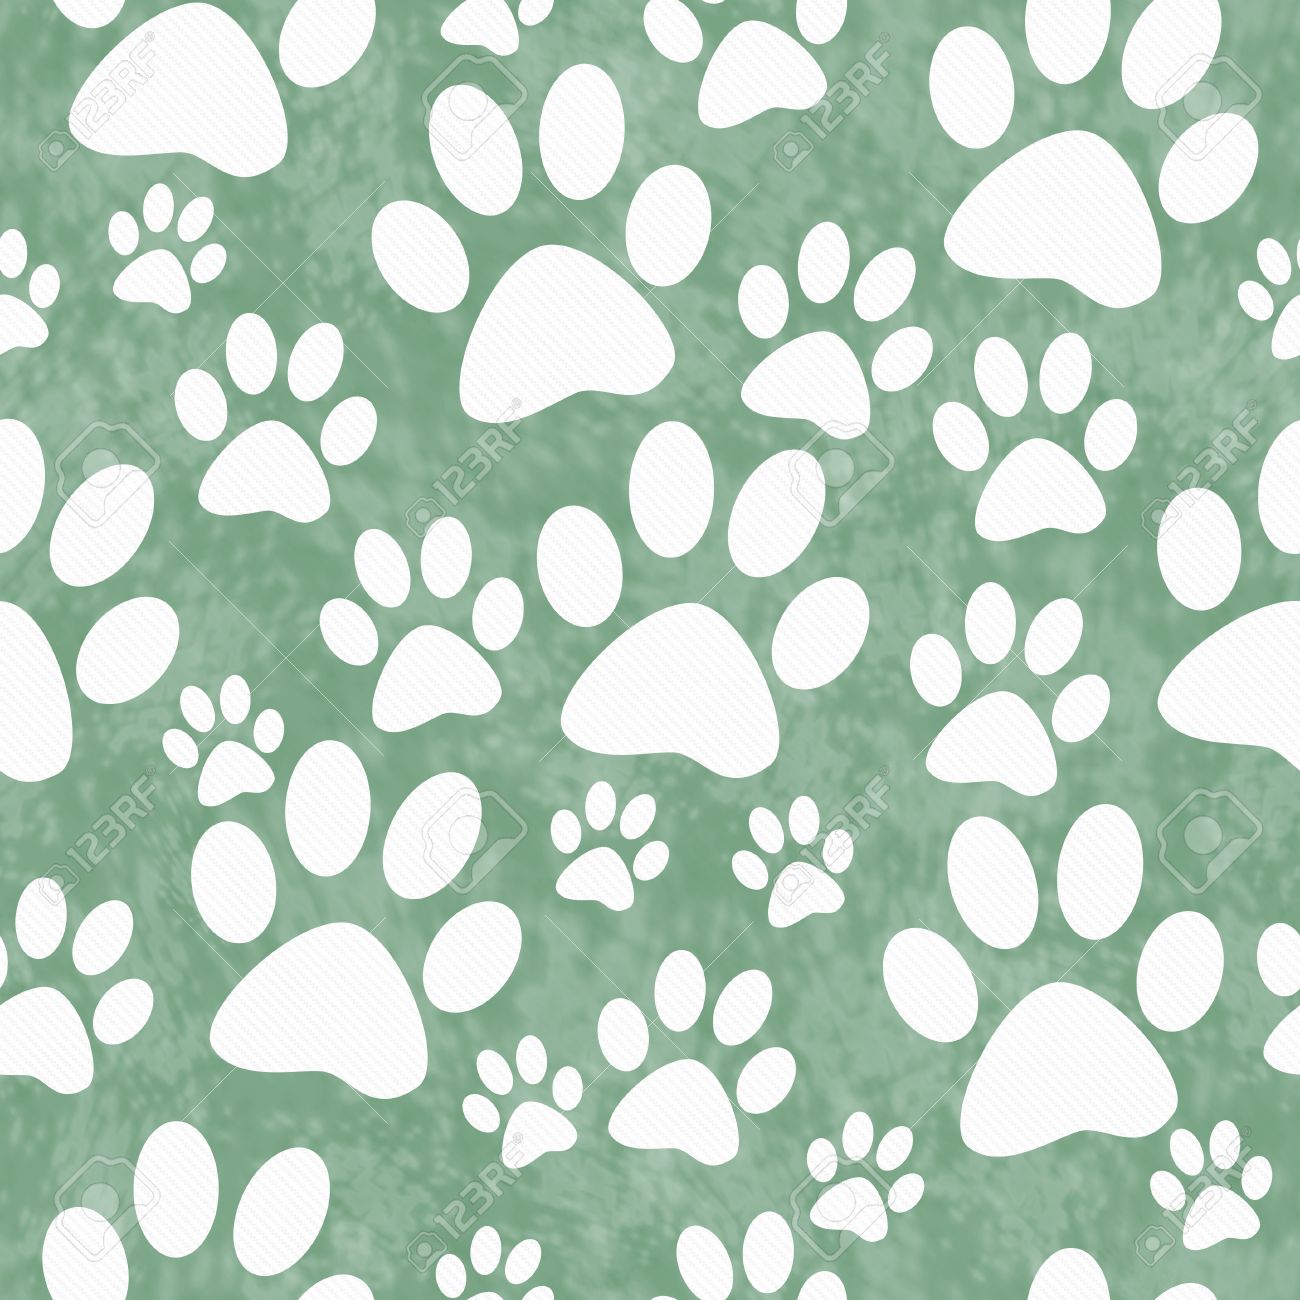 Green And White Dog Paw Prints Tile Pattern Repeat Background